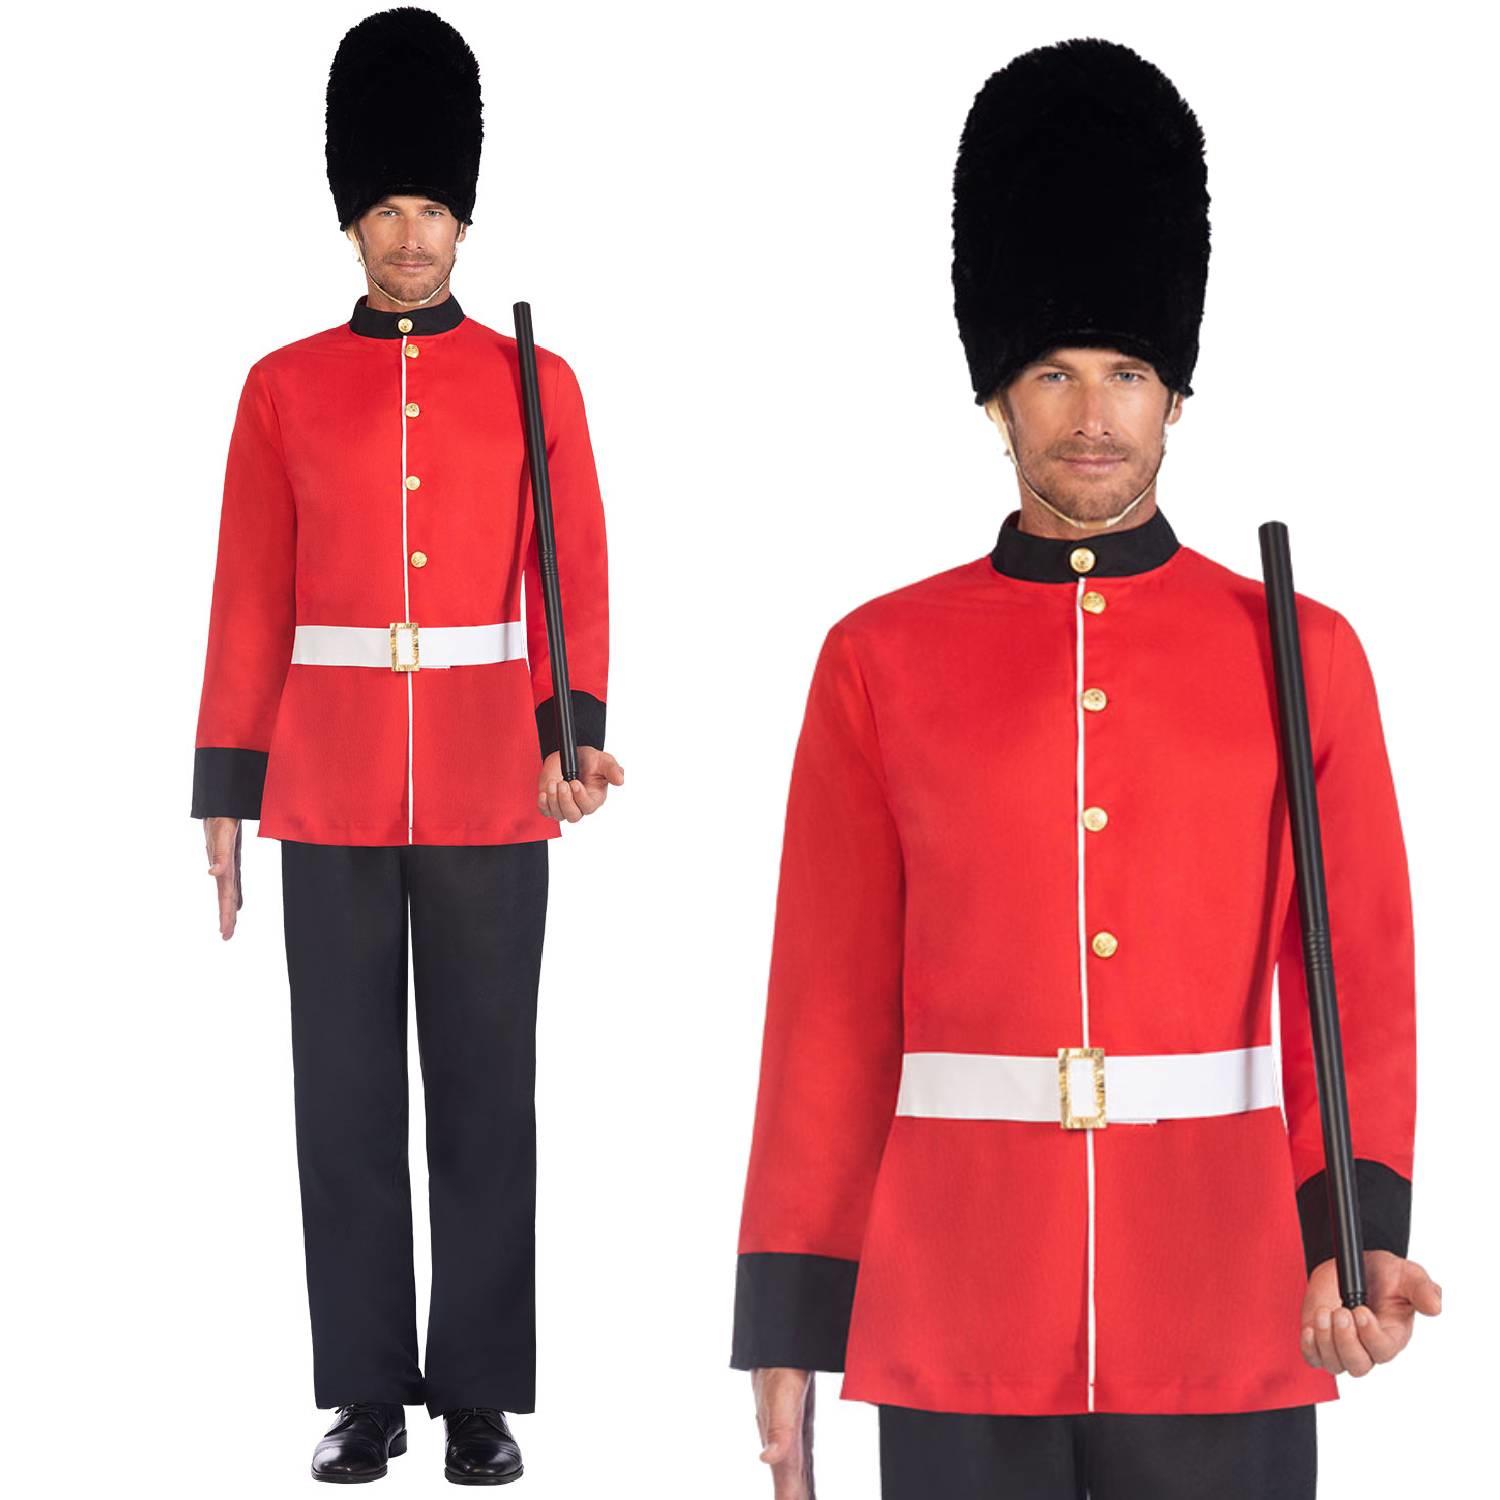 Royal Guard Costume for Adults by Amscan in Std, Lrg and XL 9908740 available here at Karnival Costumes online party shop